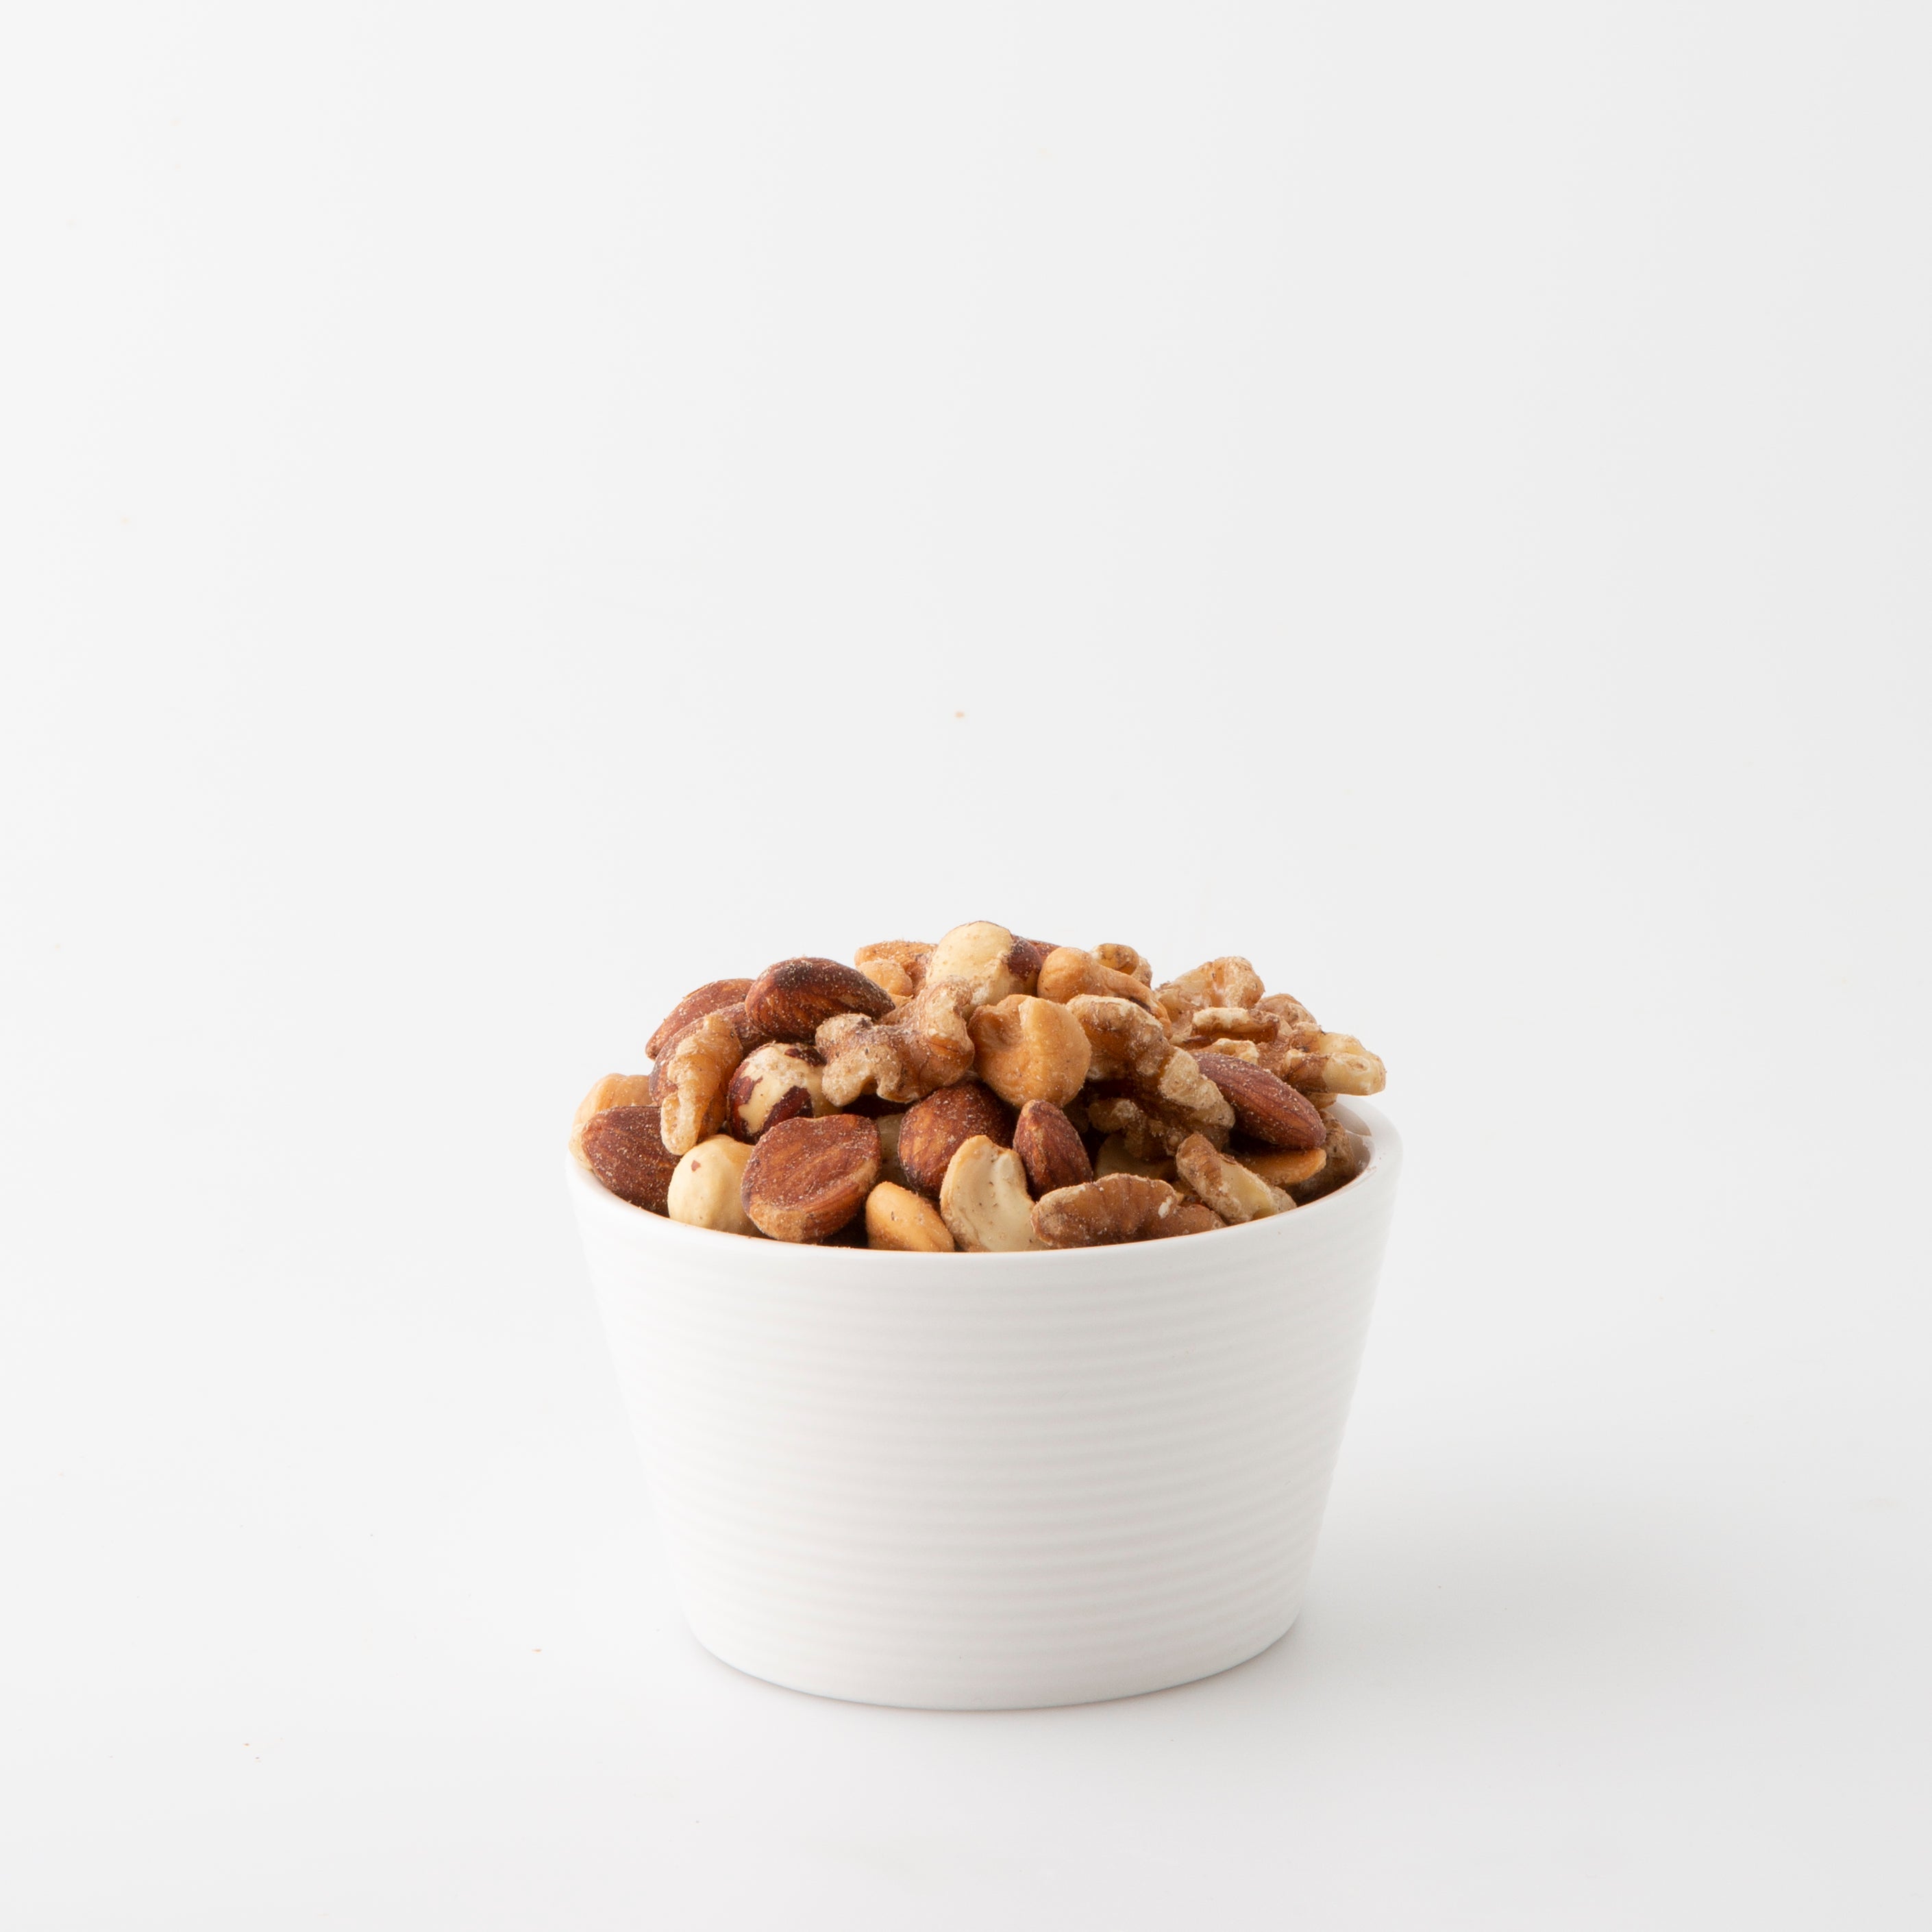 Roasted Salted Nut Mix - No Peanuts (Roasted Nuts) in white bowl - Naked Foods